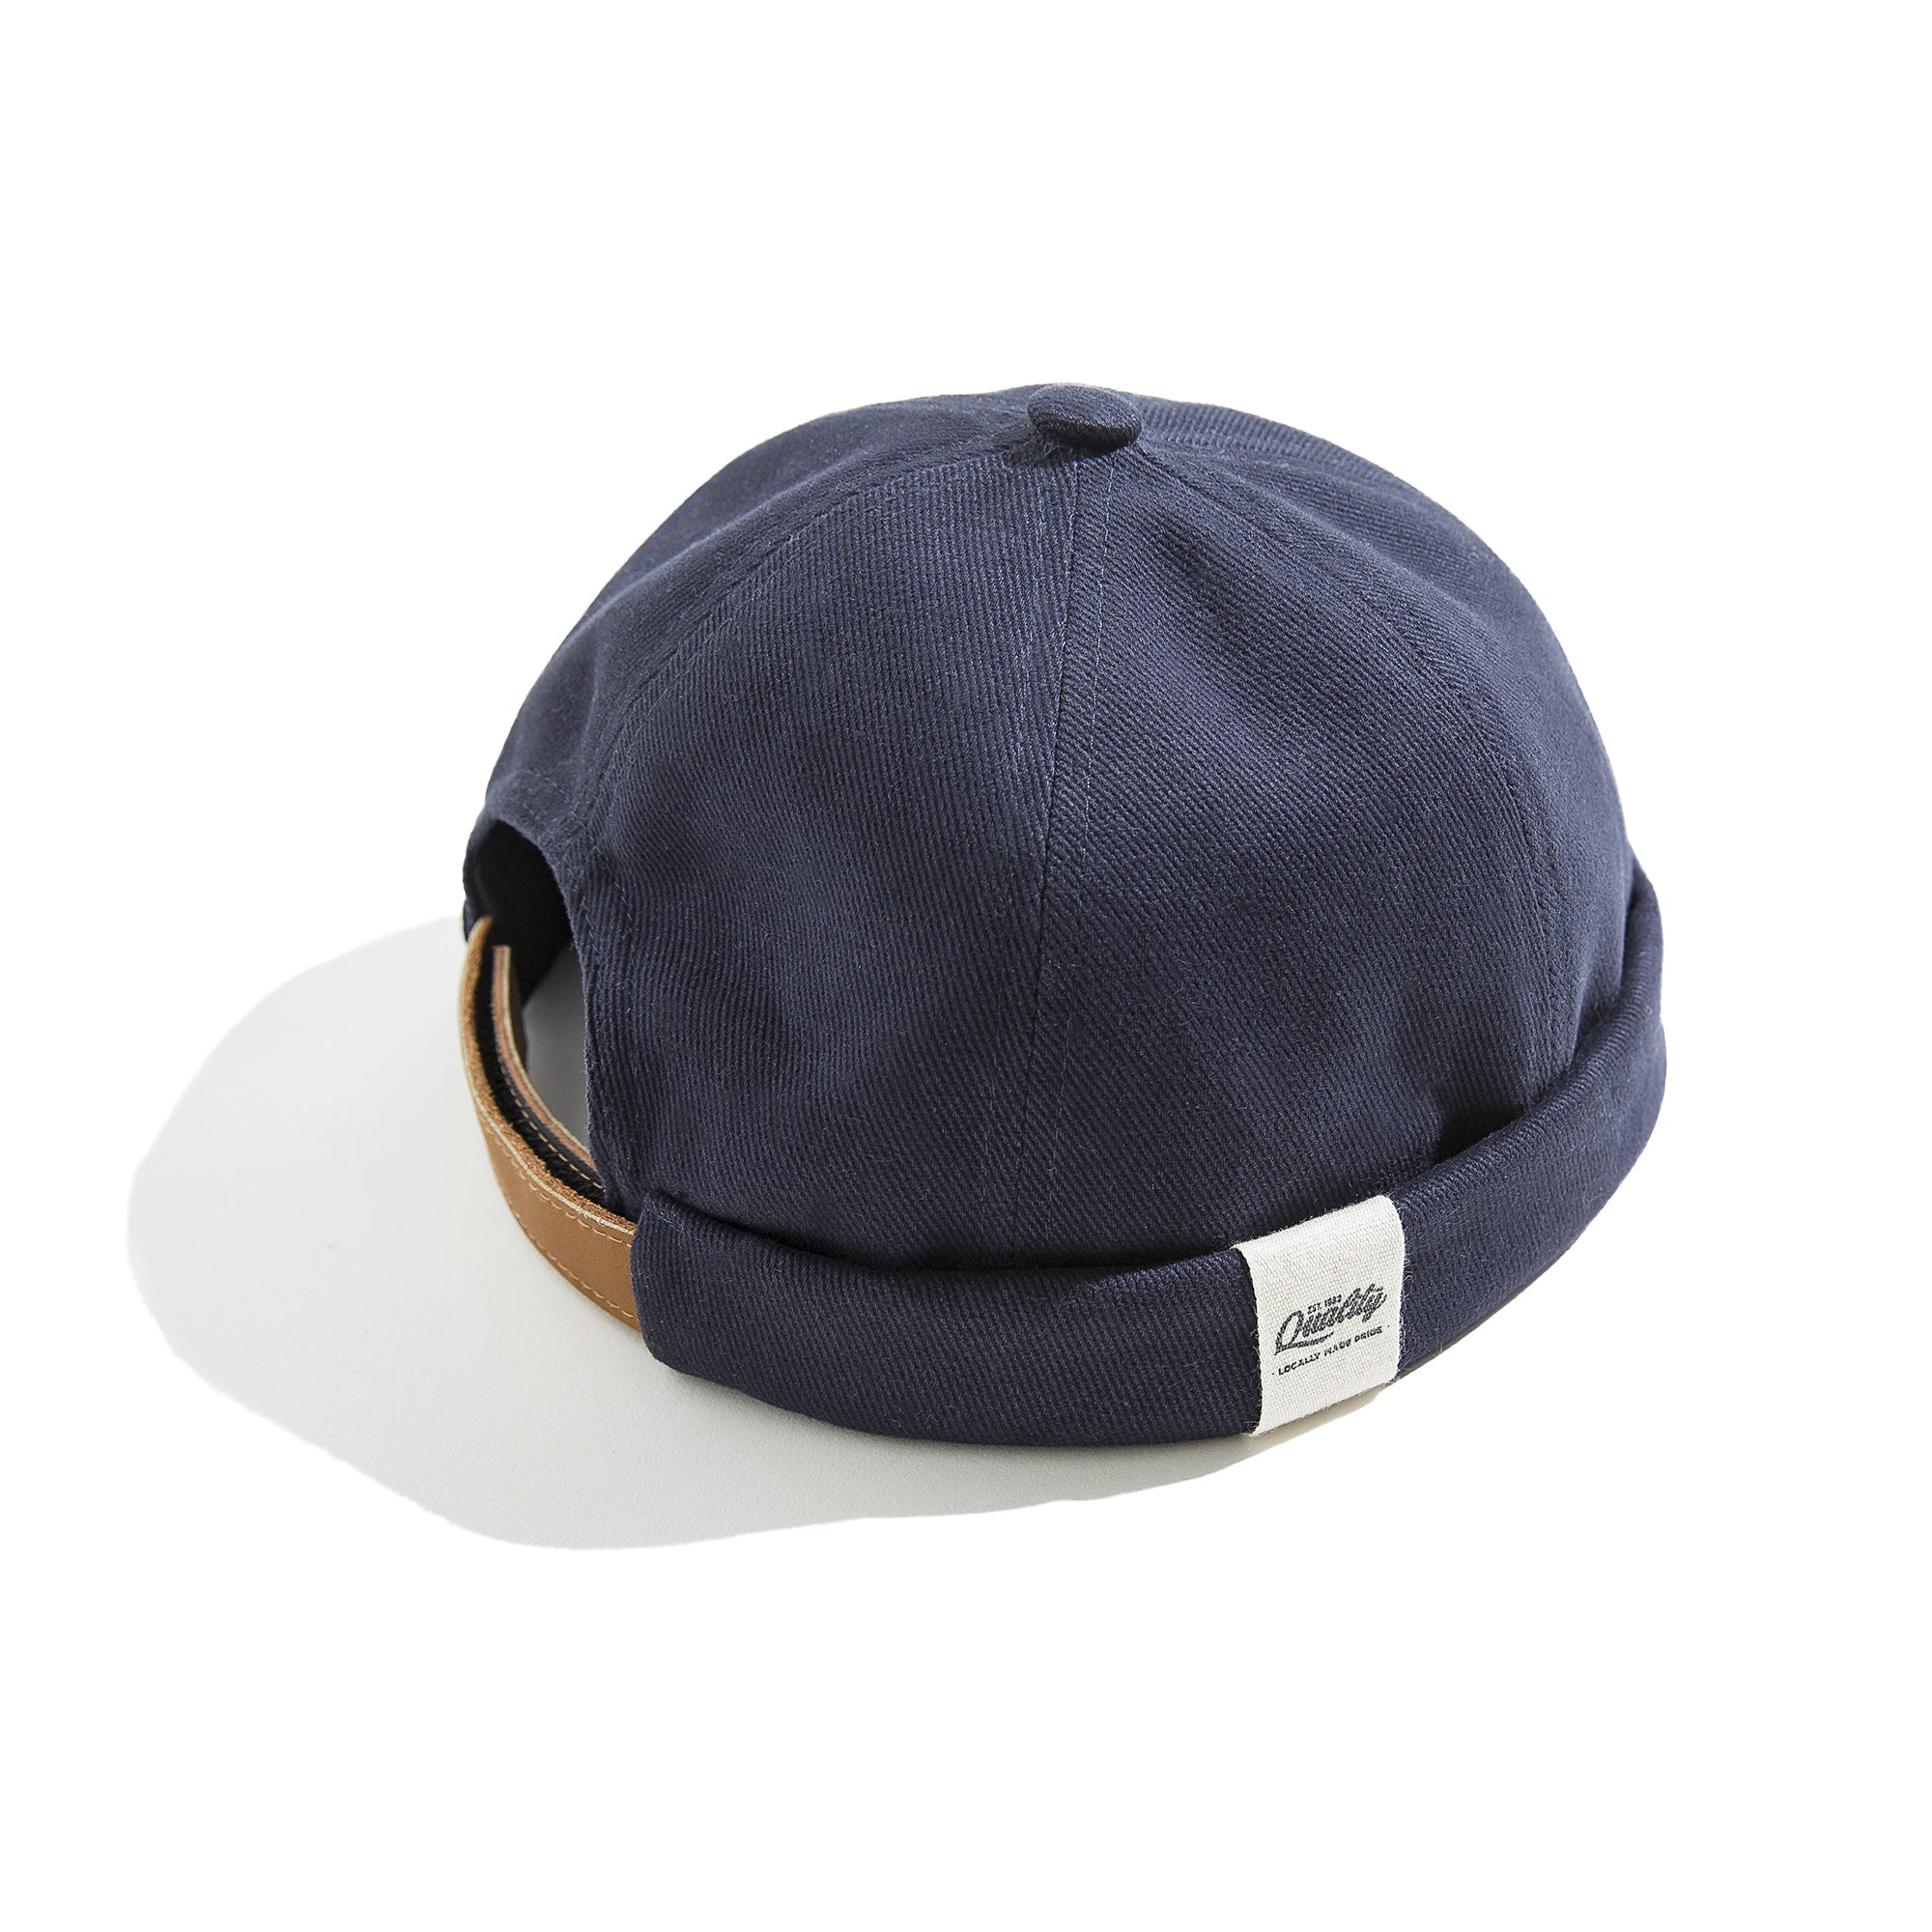 Retro Sailor Hat Brimless Brushed Cold Weather Style for Men